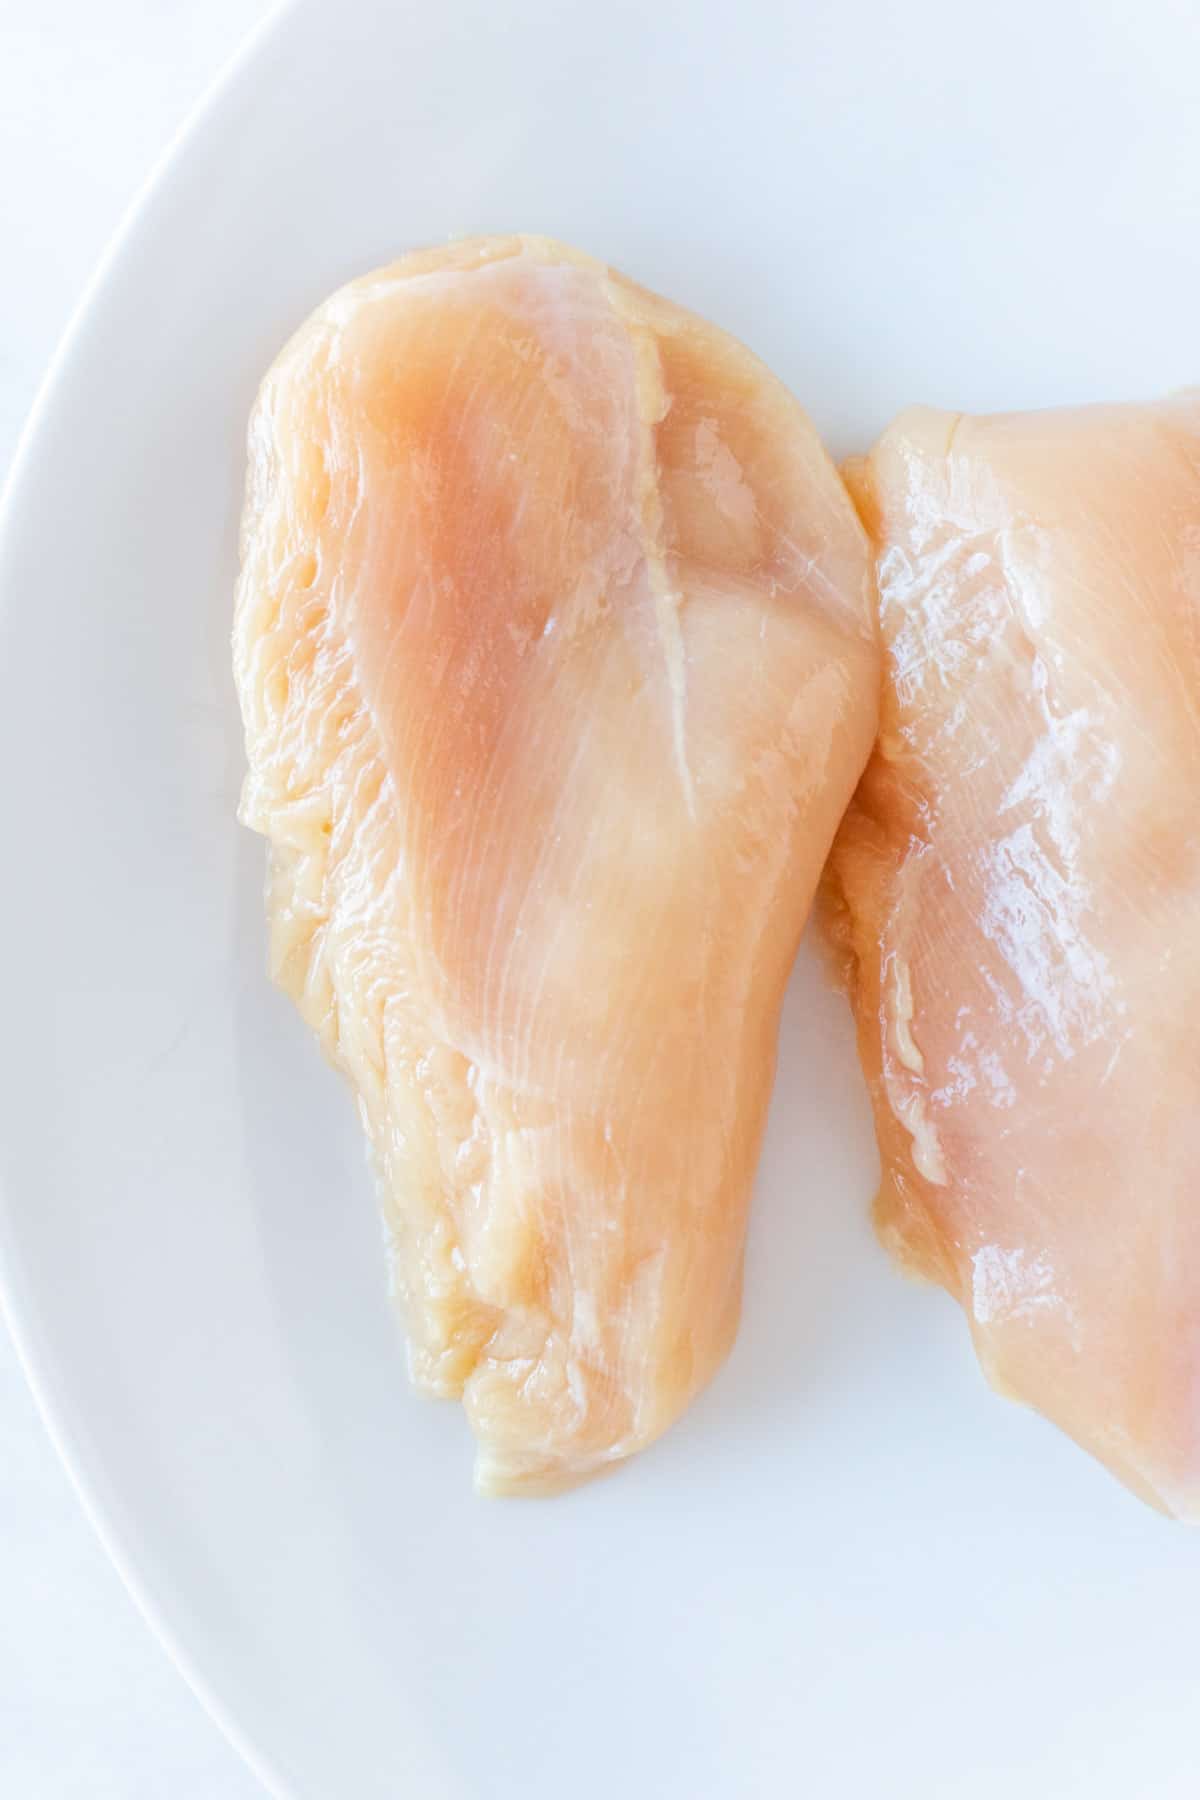 Raw chicken breast on plate